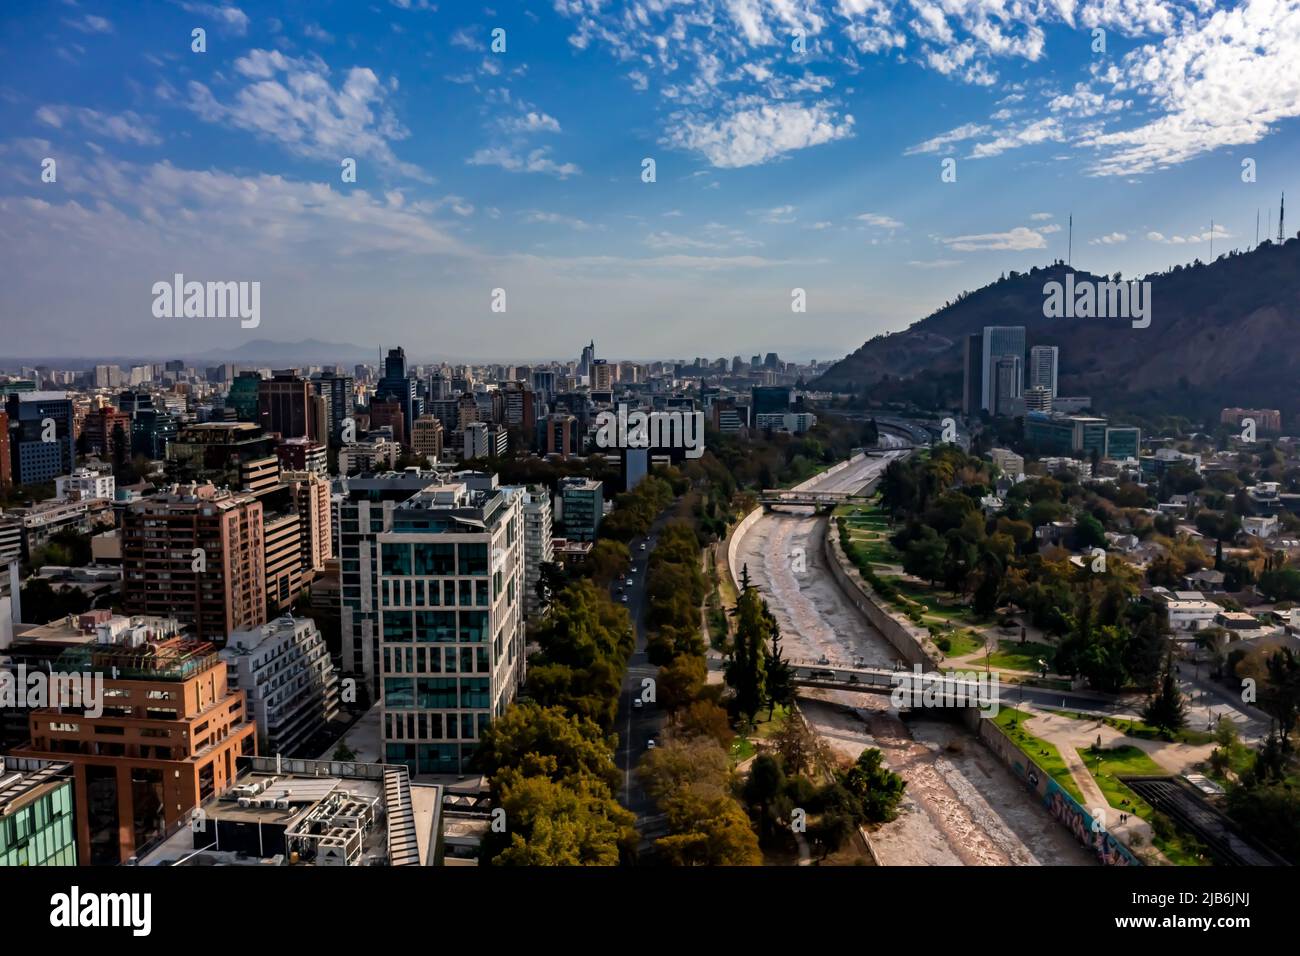 Santiago de Chile from above Stock Photo